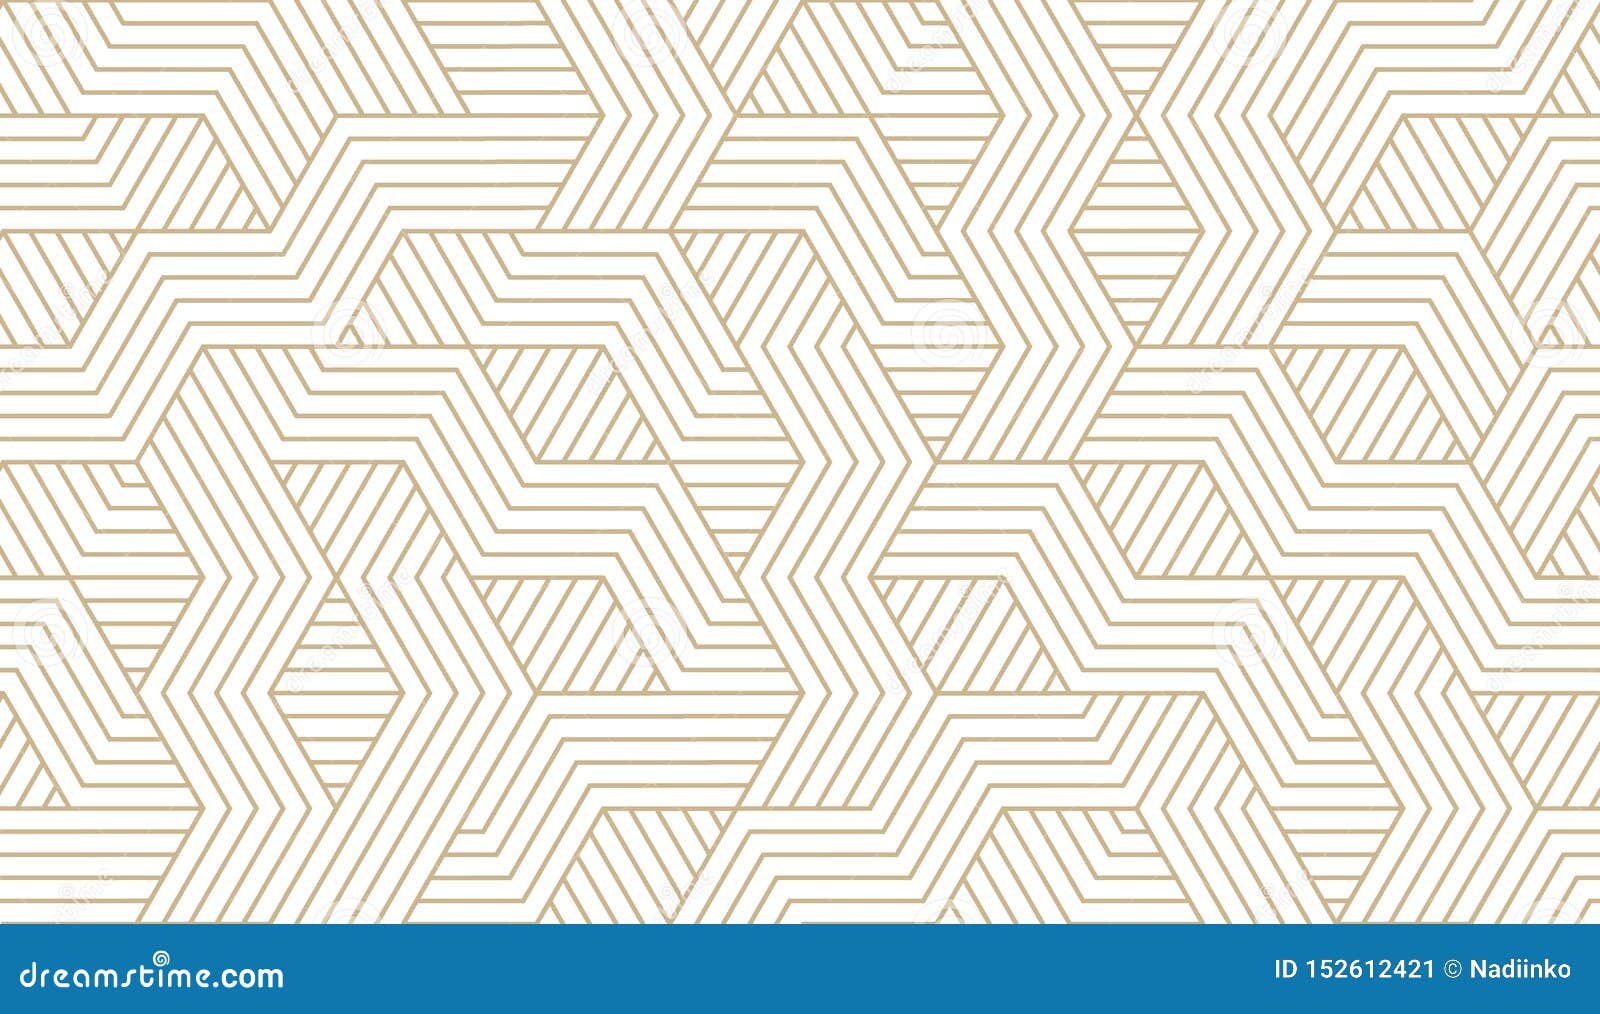 abstract simple geometric  seamless pattern with gold line texture on white background. light modern simple